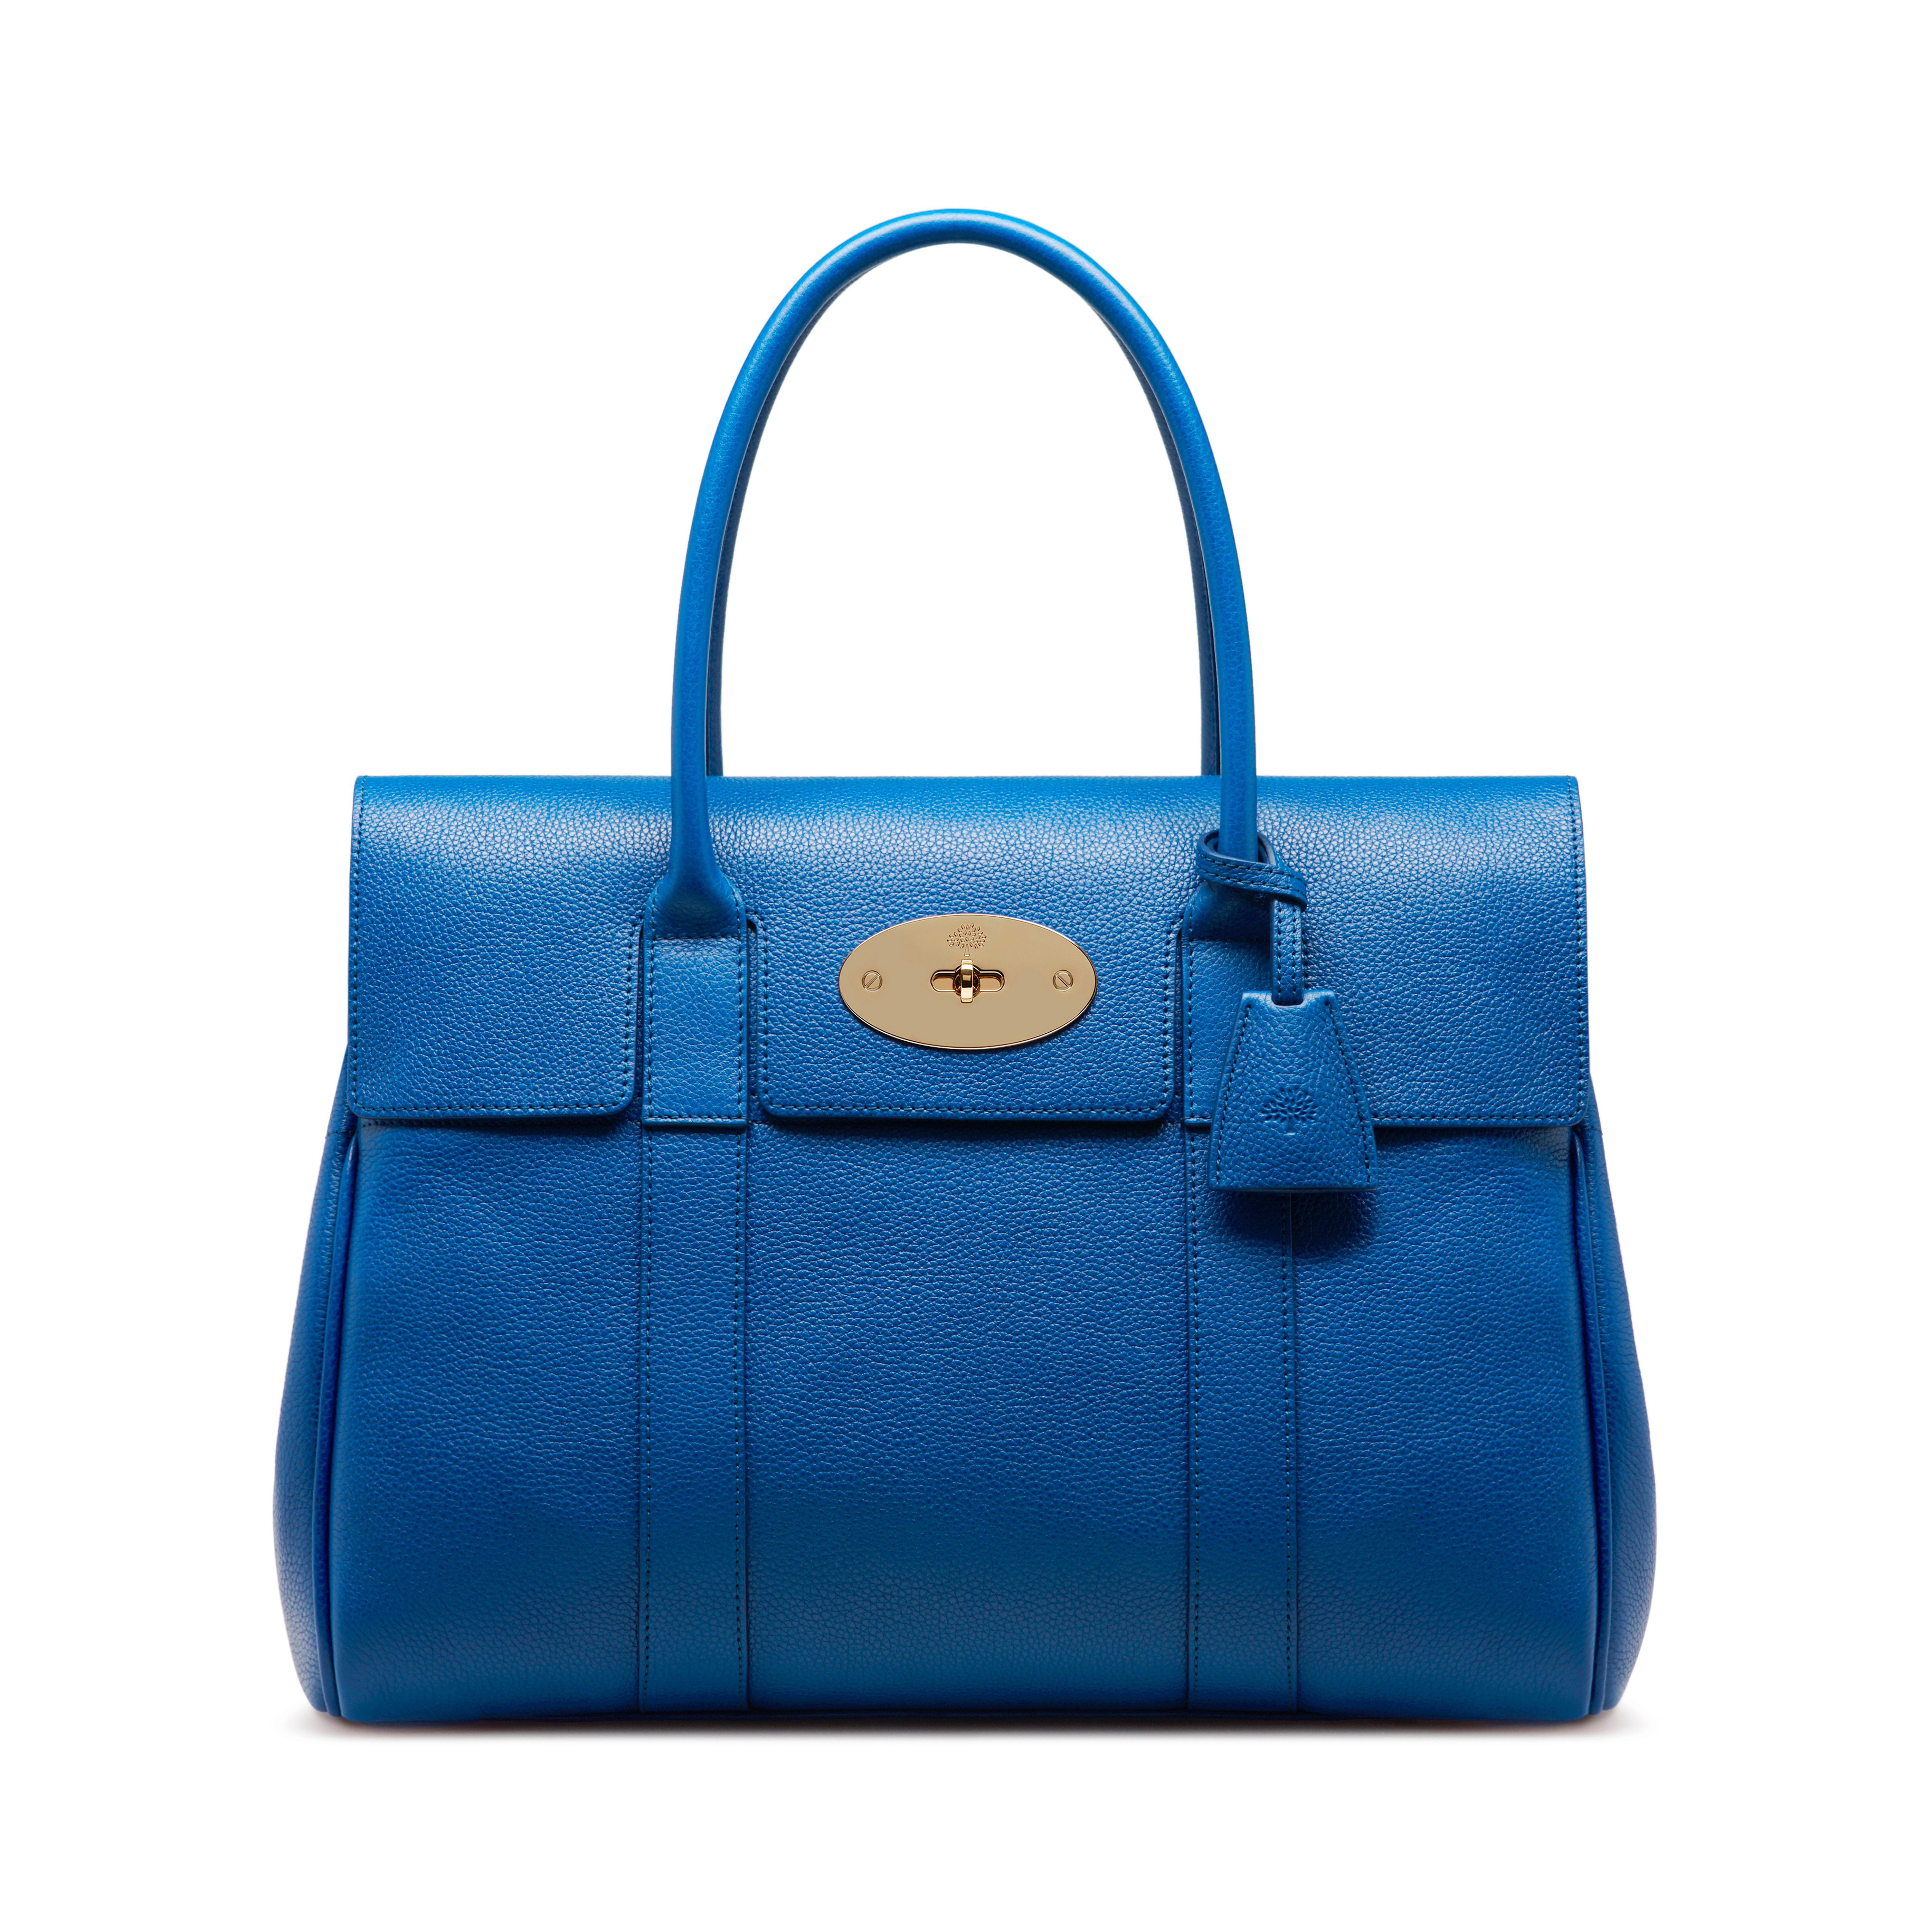 Mulberry blue Leather North South Bayswater Tote Bag | Harrods UK